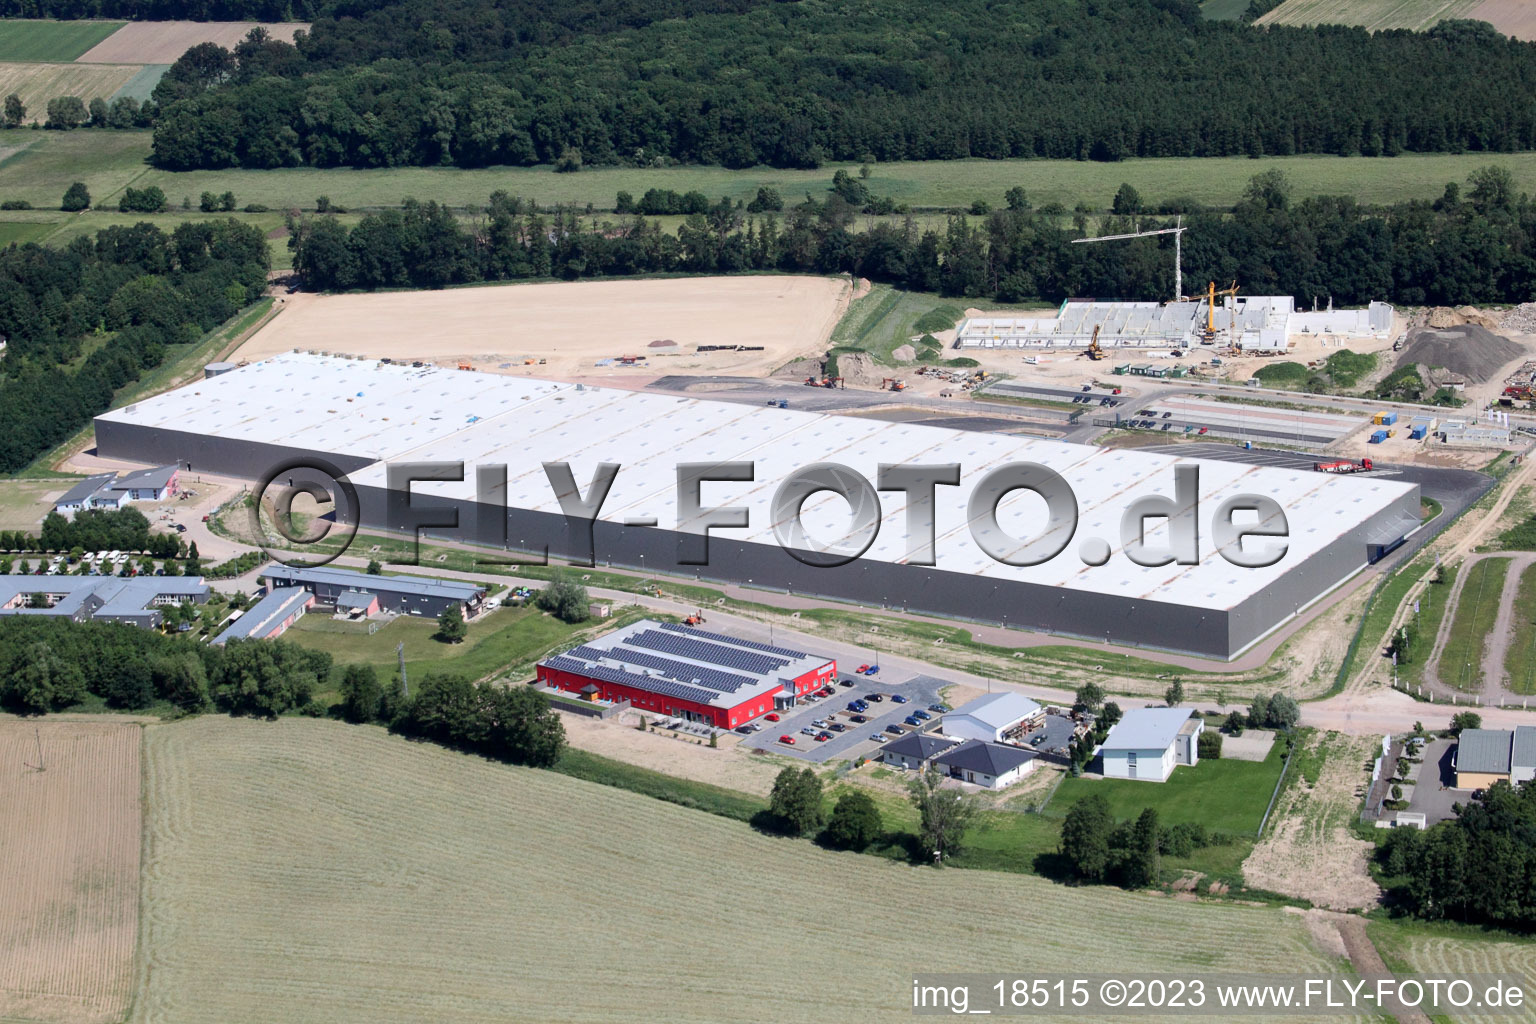 Bienwald Fitness World in the district Minderslachen in Kandel in the state Rhineland-Palatinate, Germany seen from above